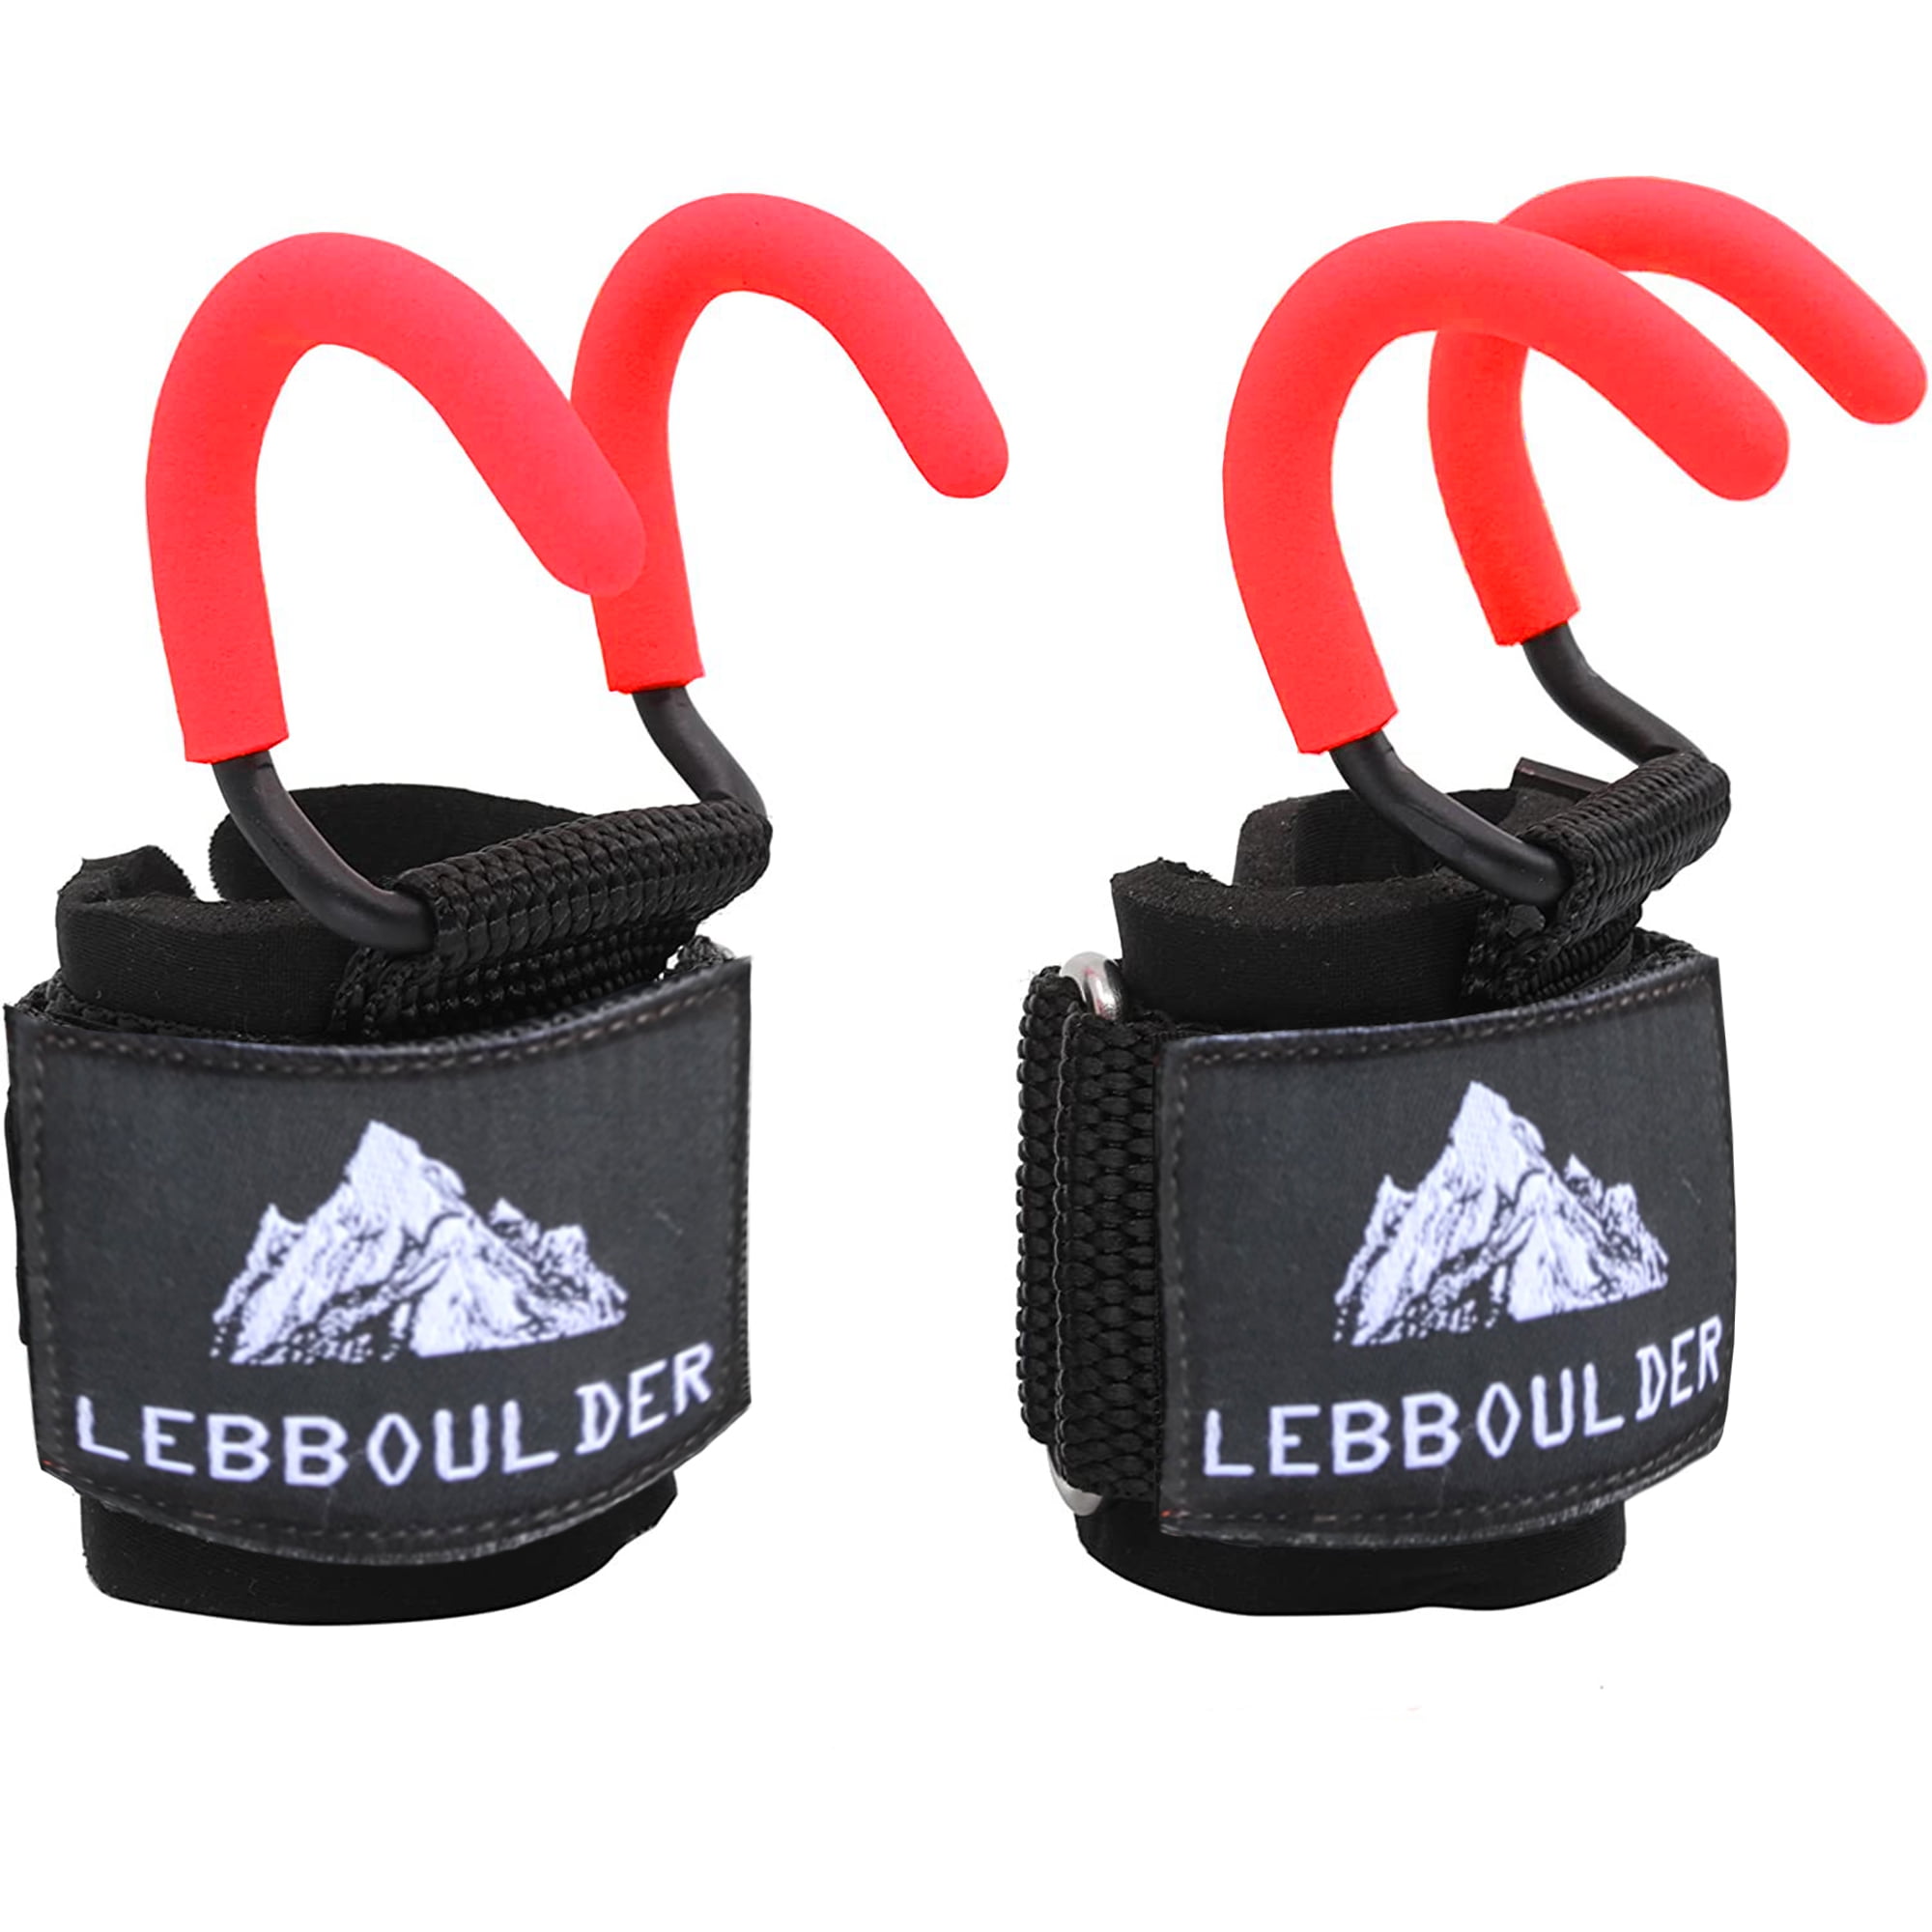 Power Weight Lifting Hooks Gloves With Grips And Straps For Wrist Support 